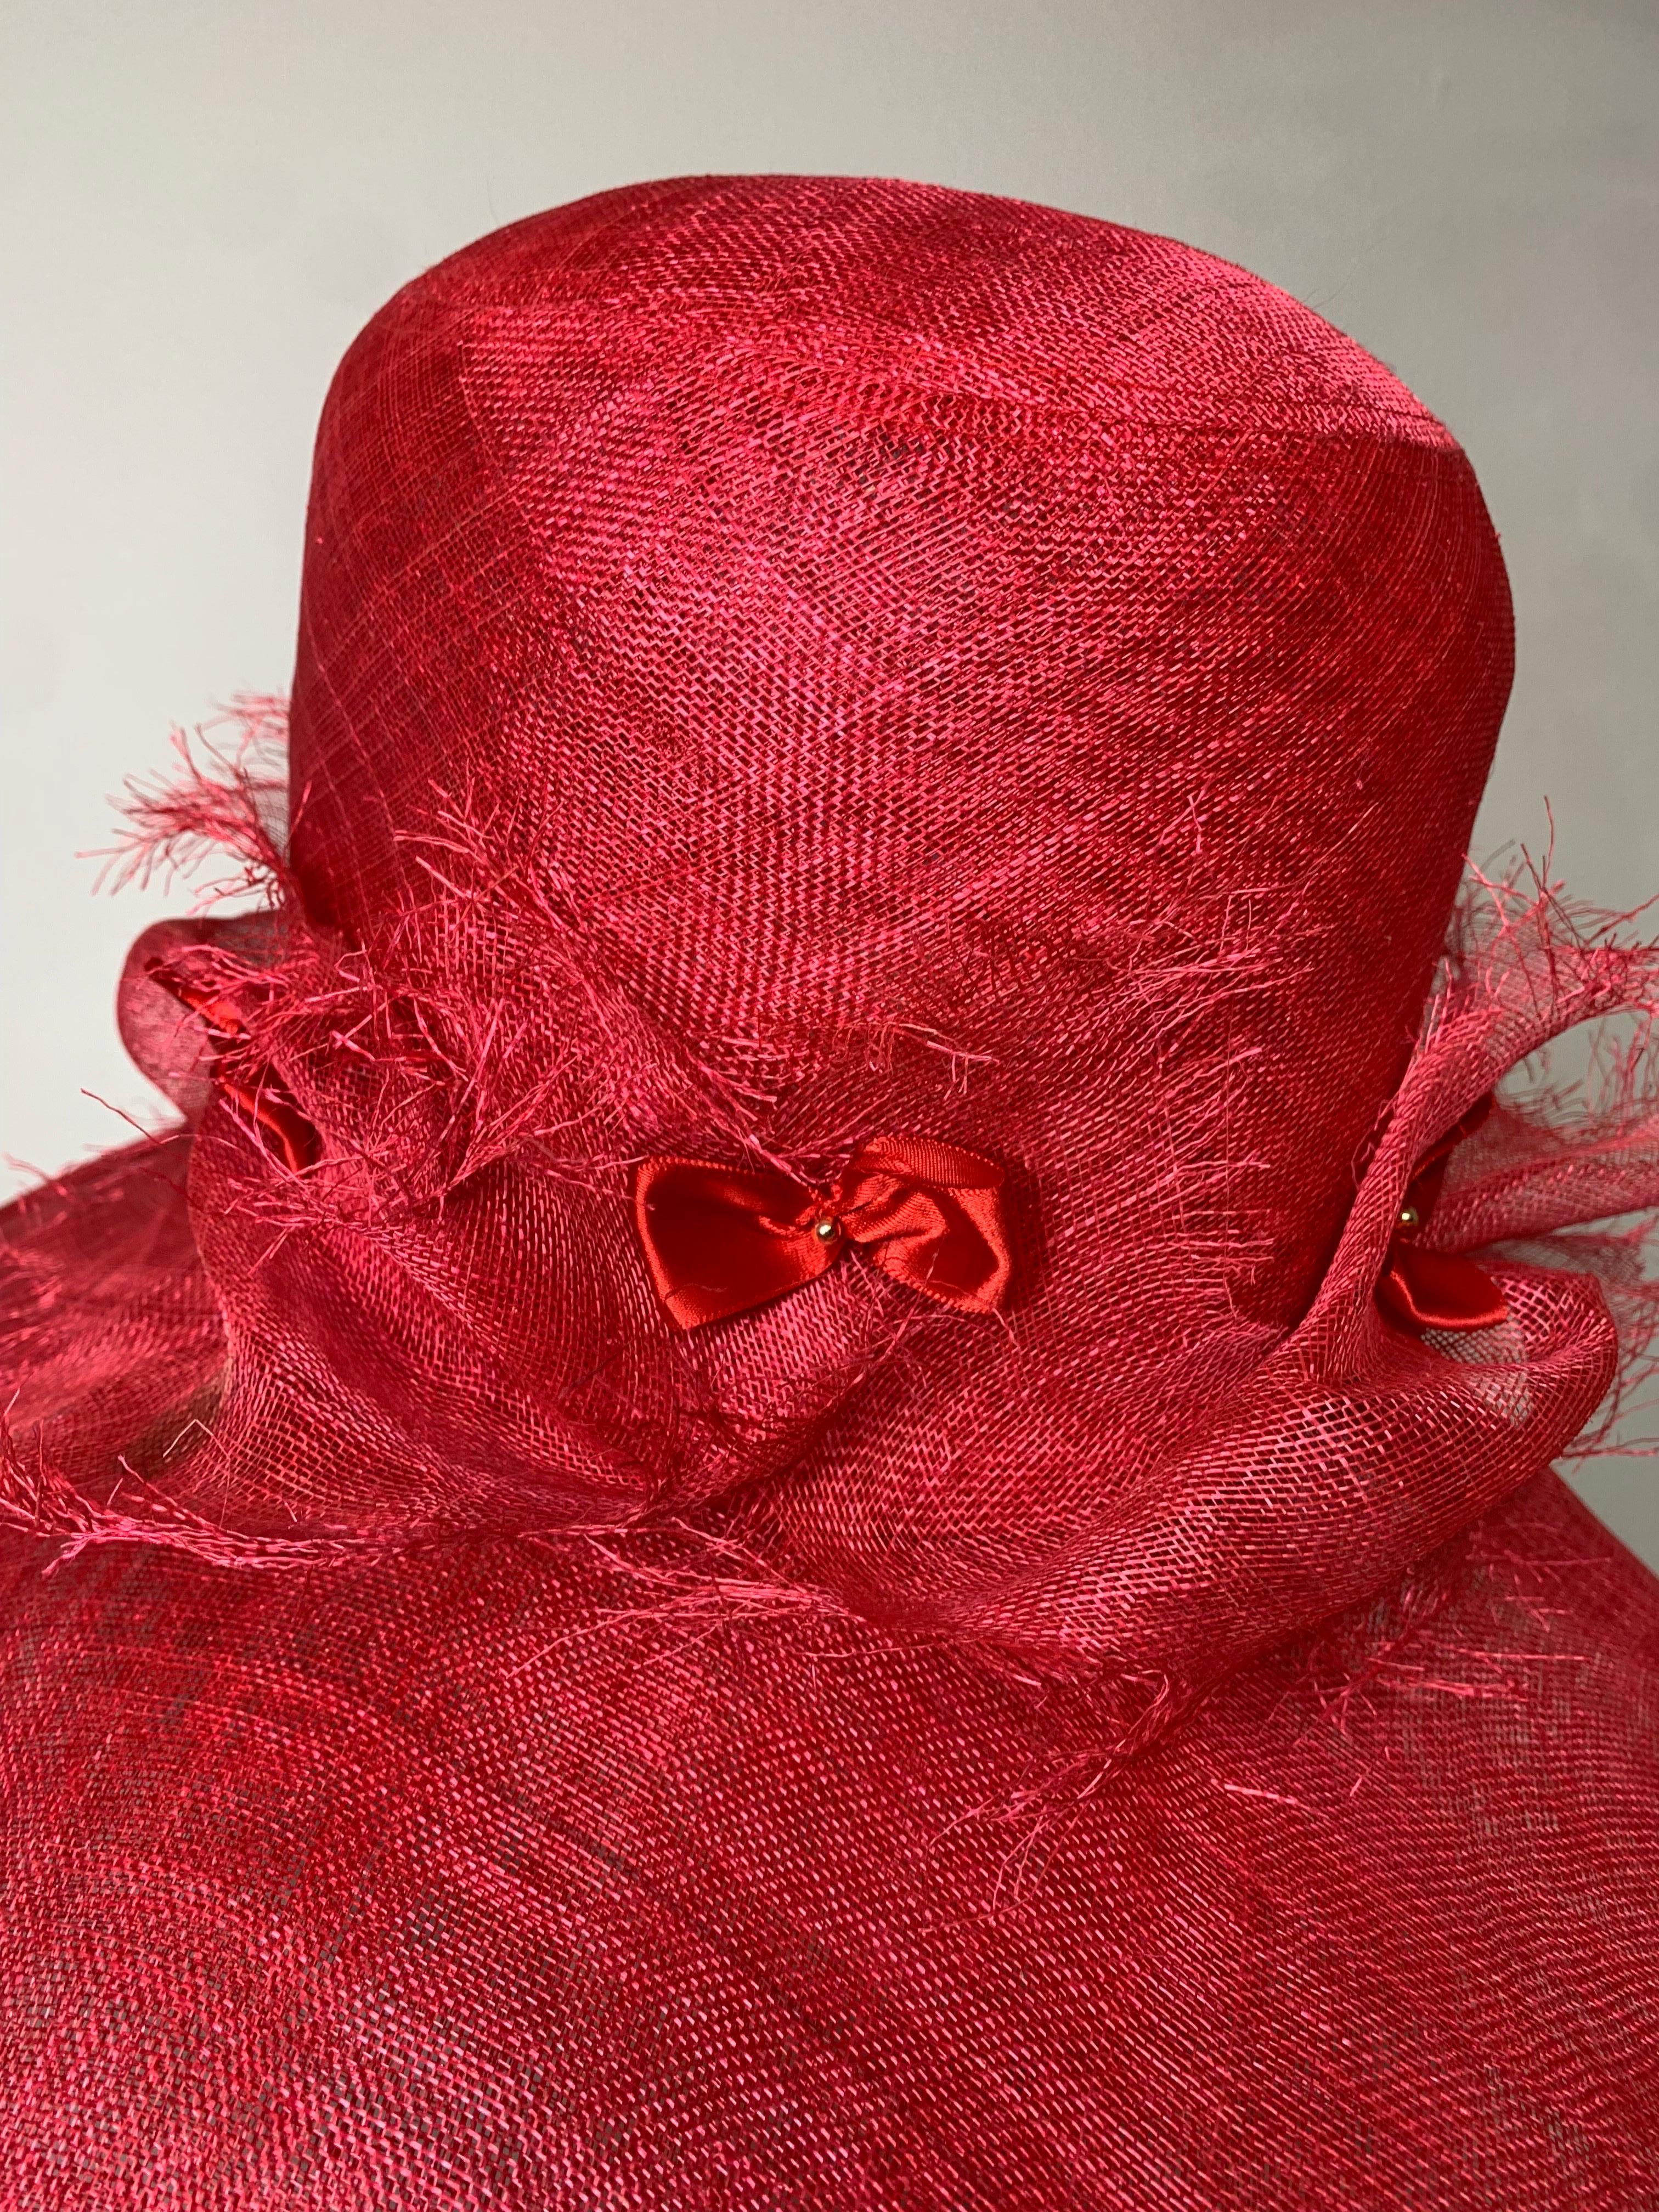 Maison Michel Cardinal Red Sheer Straw Wide Brim Tall Crown Hat w Satin Bows For Sale 8